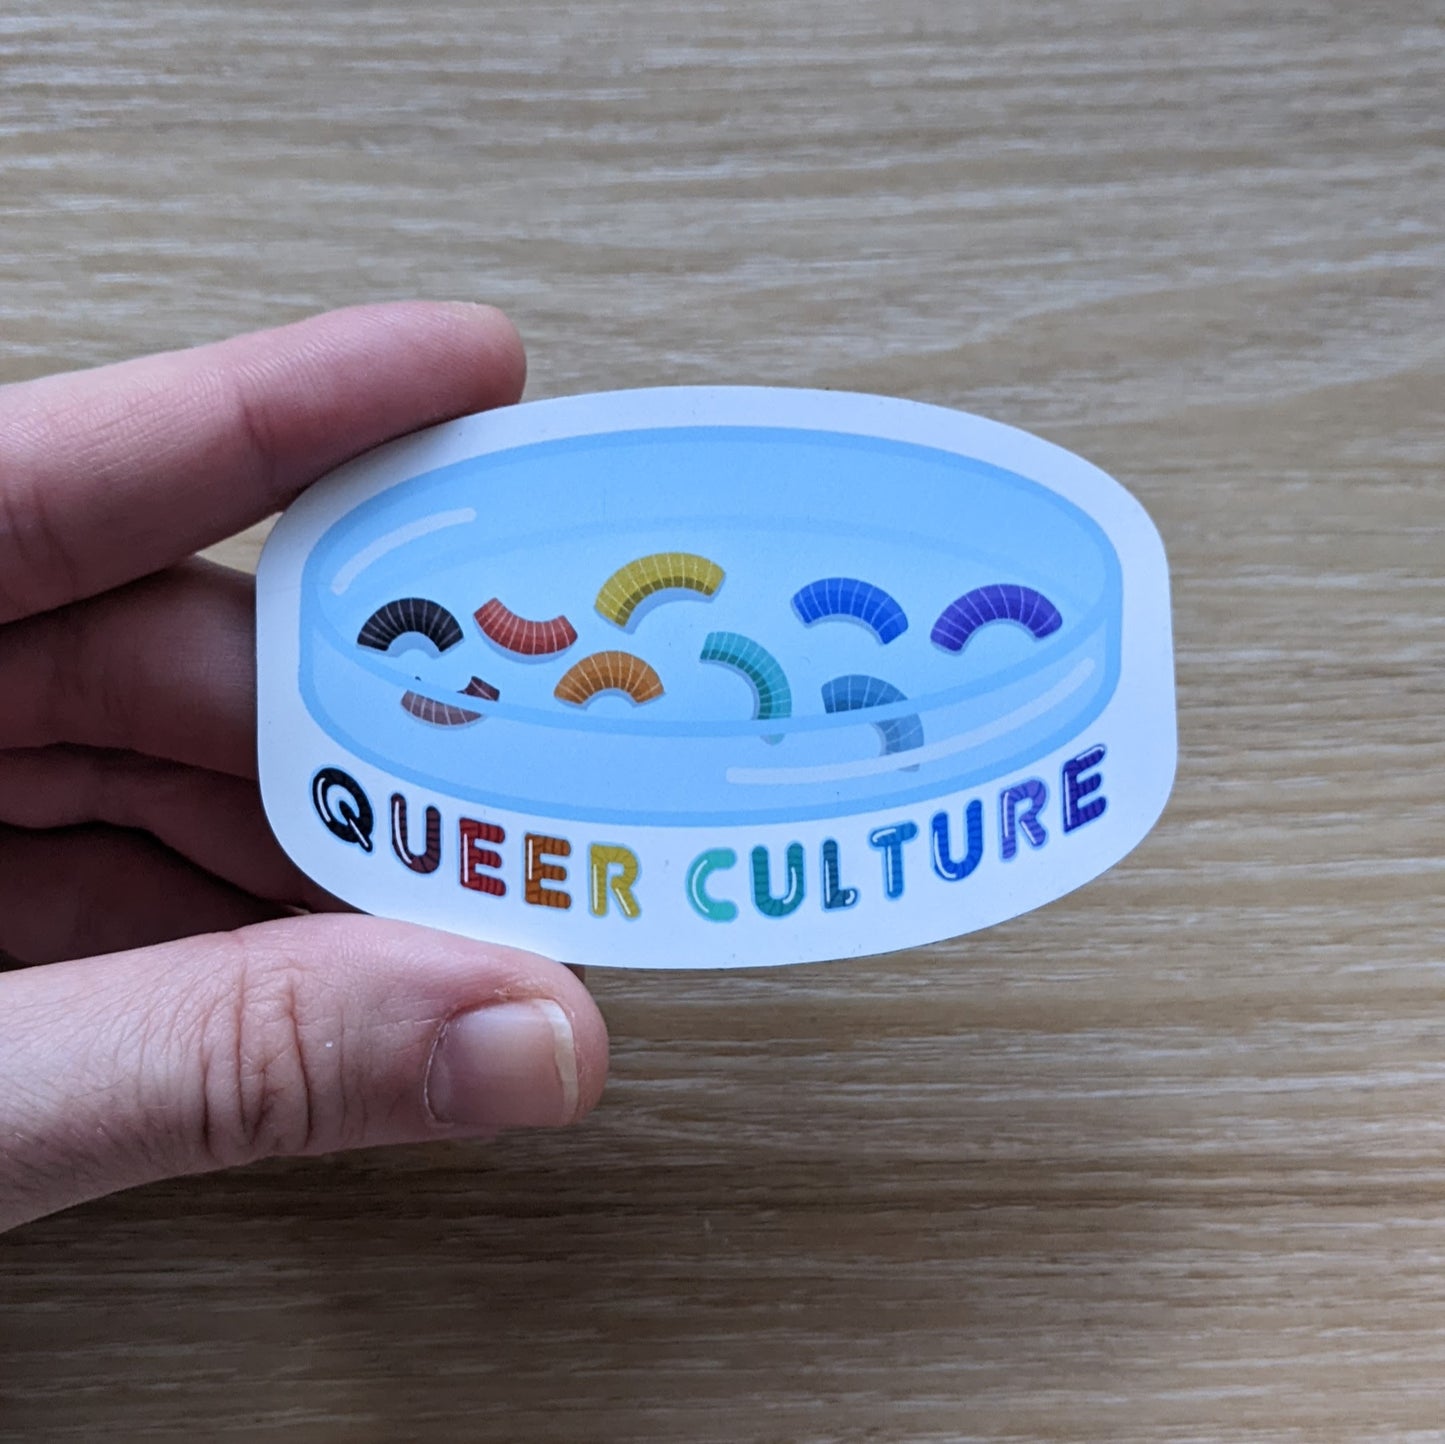 Culture queer | Aimant